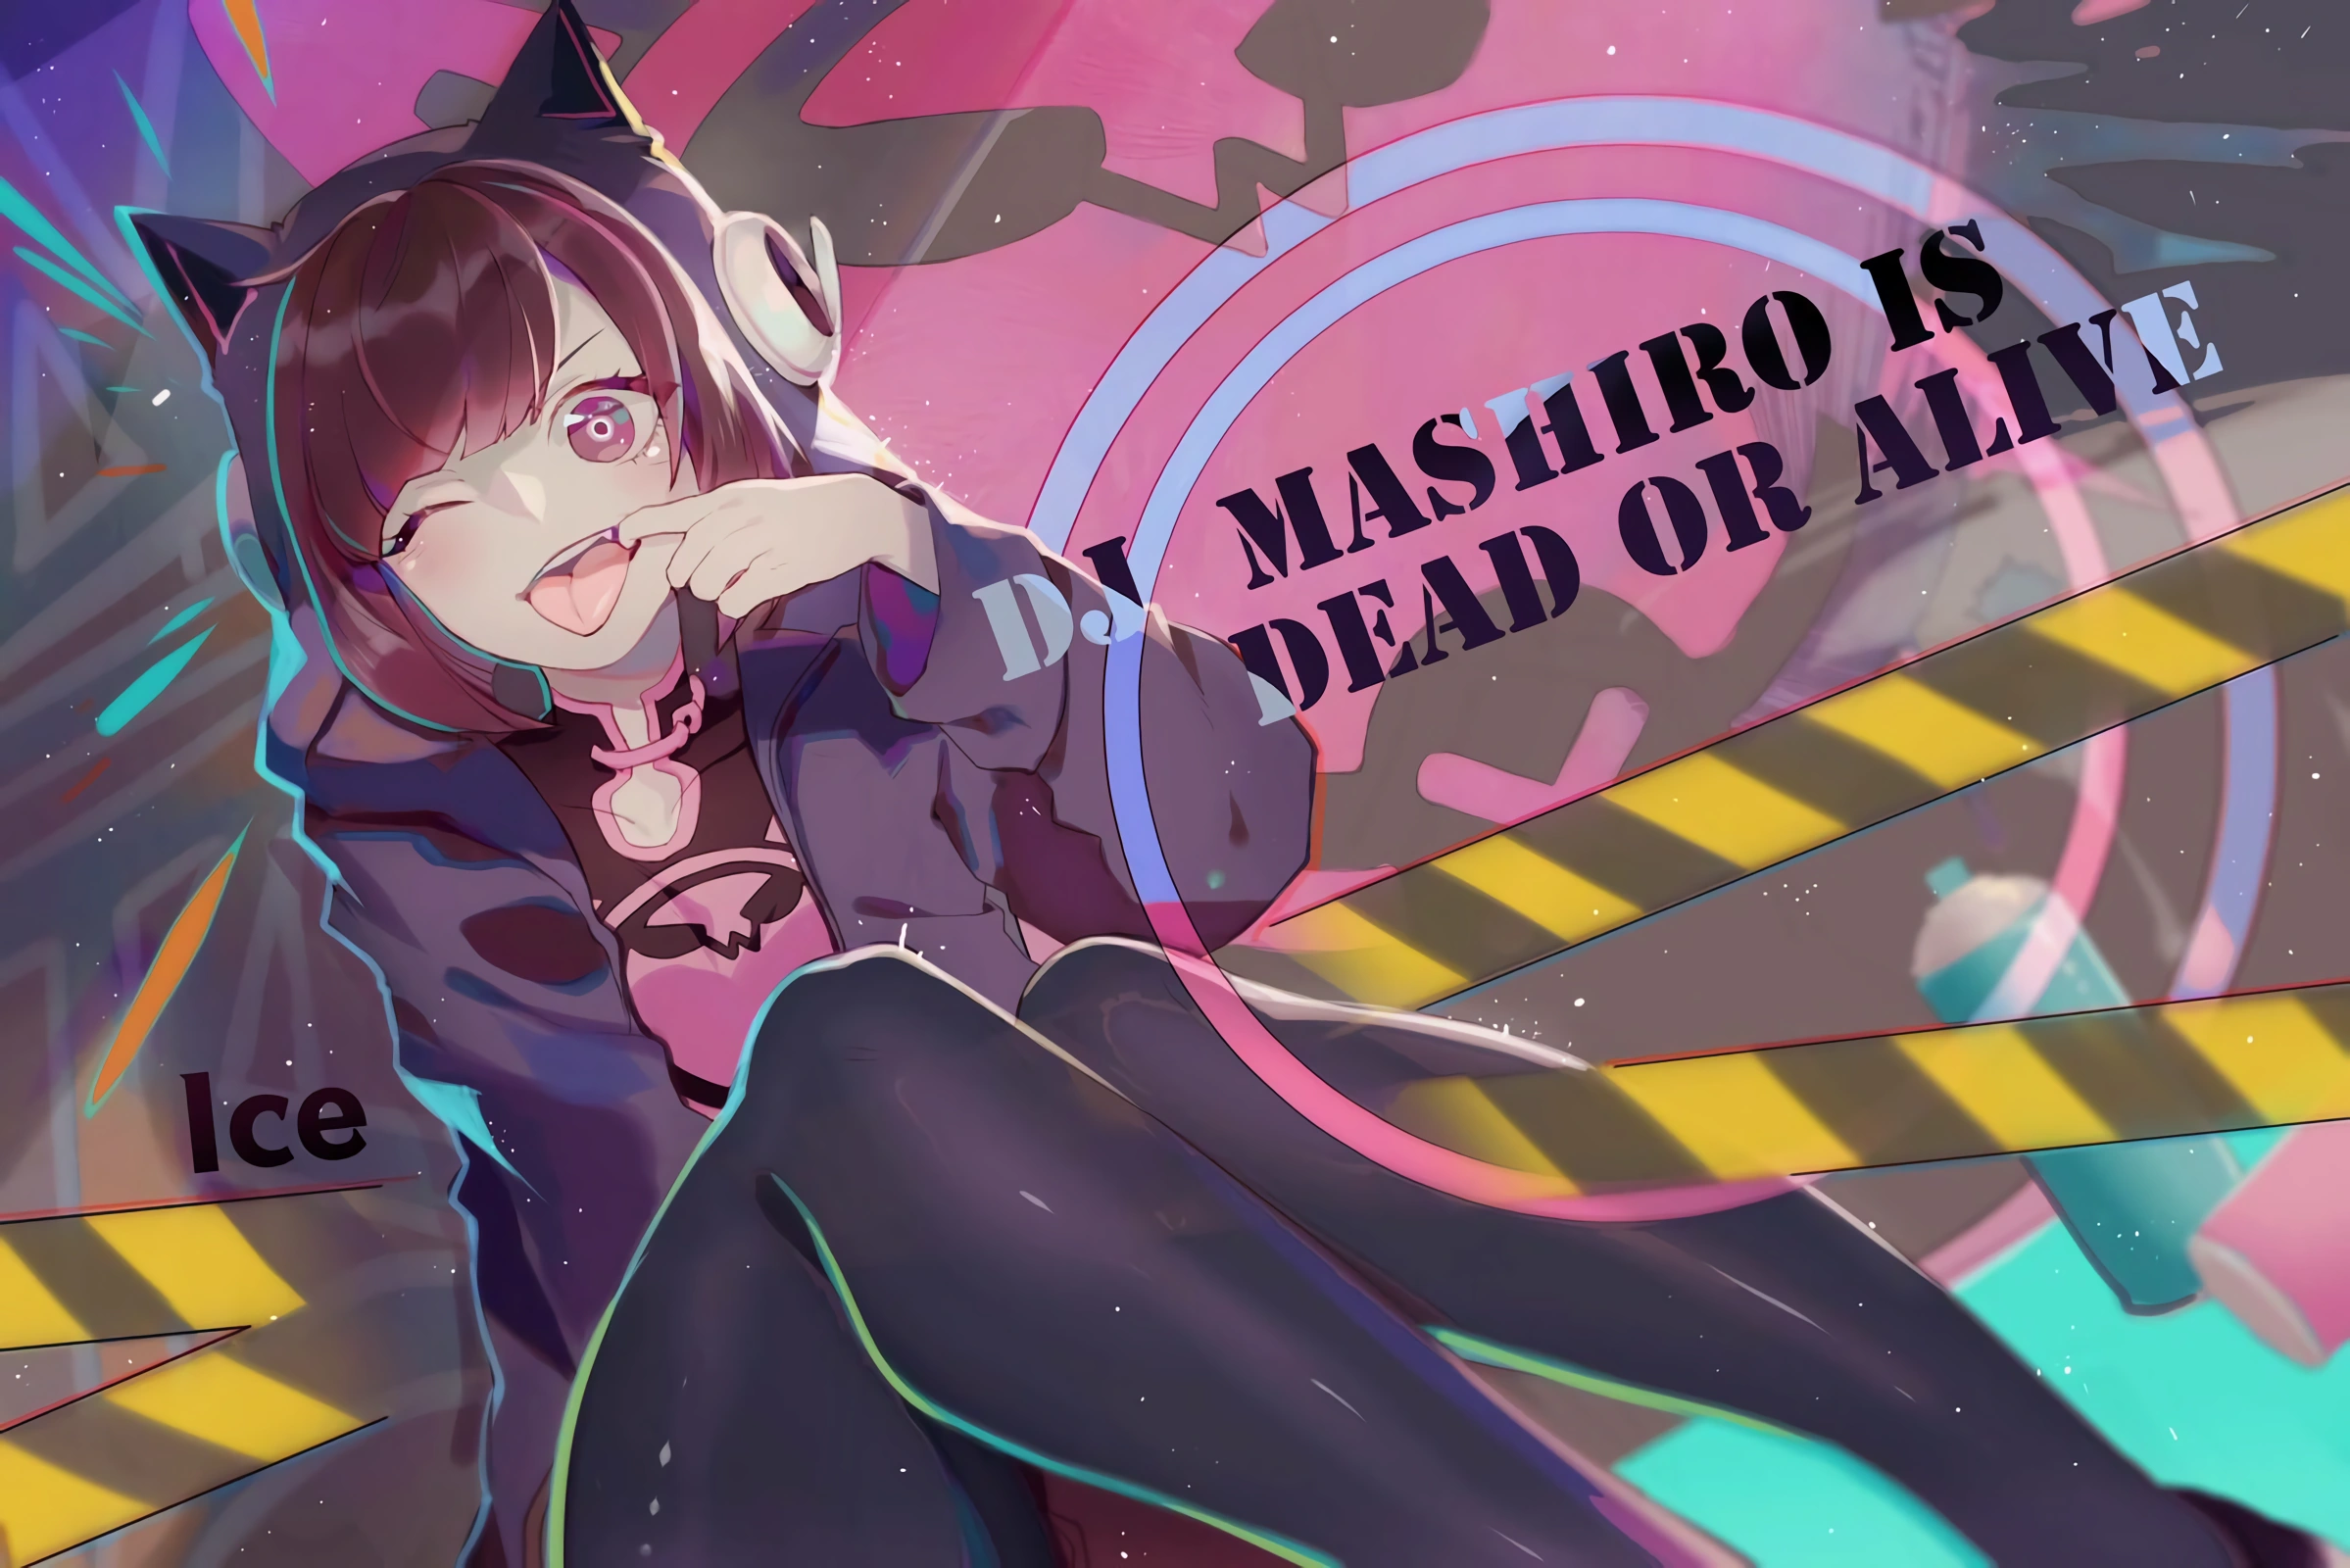 DJ Mashiro is dead or alive.png